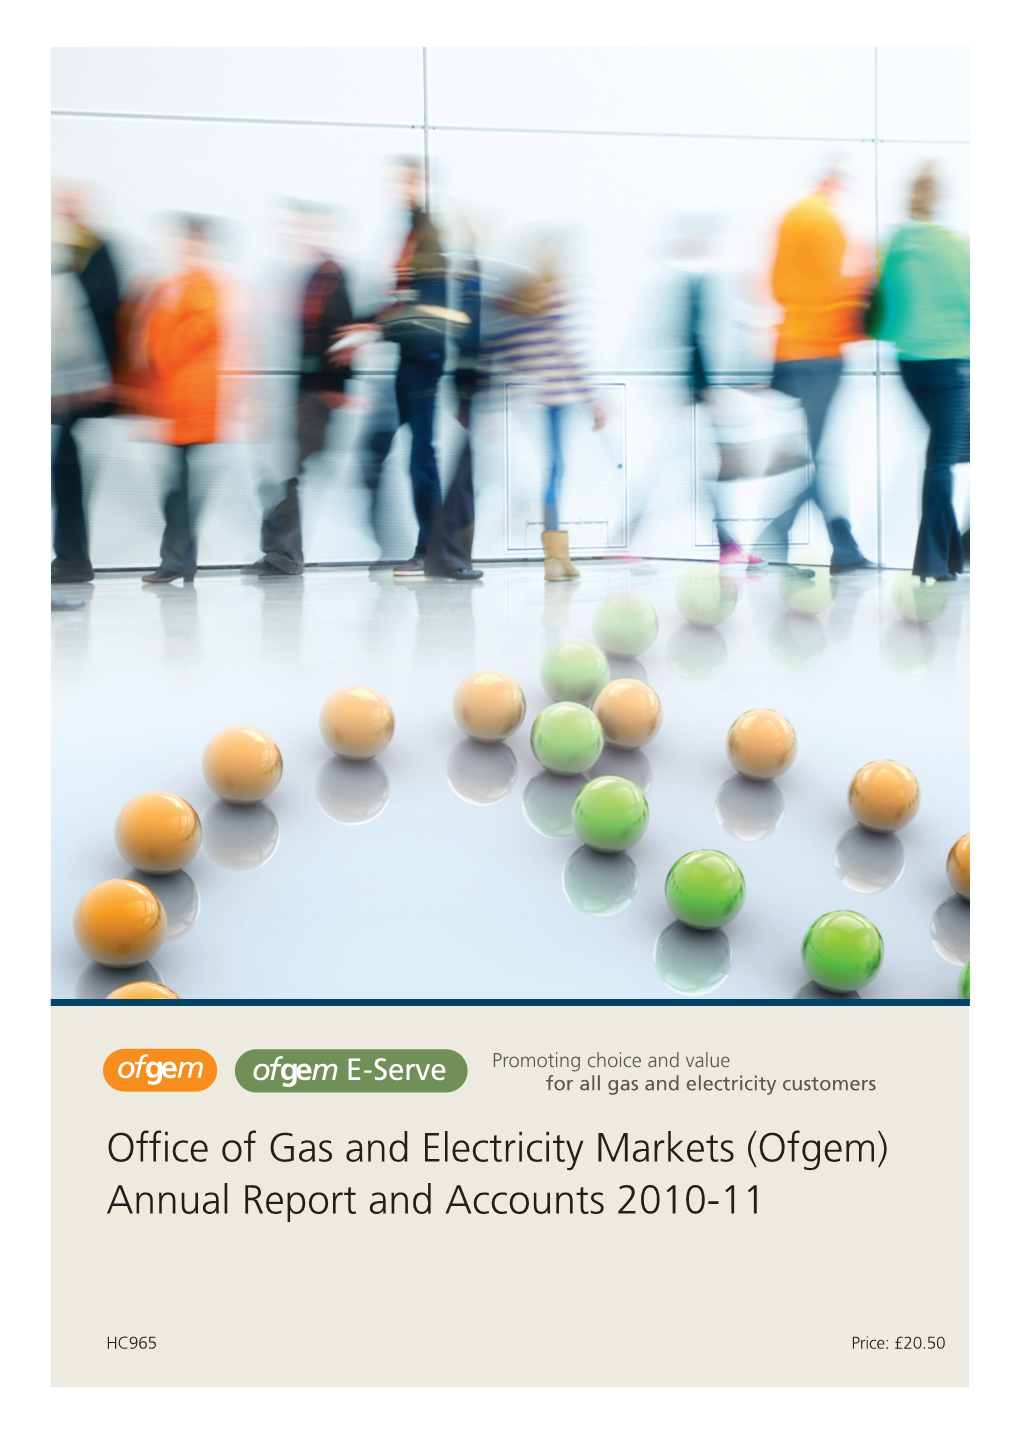 Ofgem) Annual Report and Accounts 2010-11